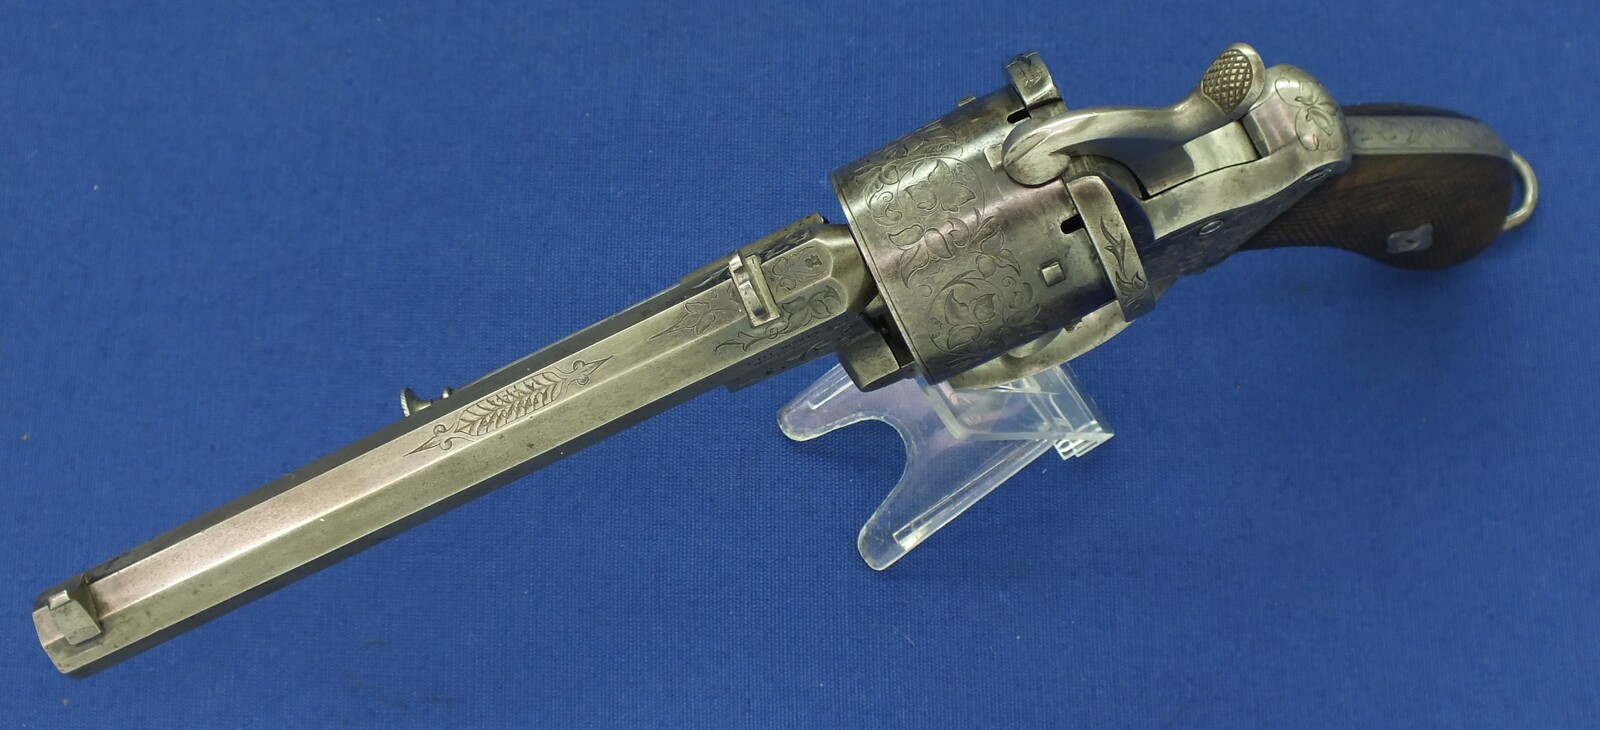 A fine Antique Belgian cased engraved Lefaucheux patent 6 shot 12 mm Pinfire Revolver by Auguste Francotte. escutcheon on lid signed: Robert Conway Swatow (Shantou) China 1867. In very good condition. Price 2.950 euro